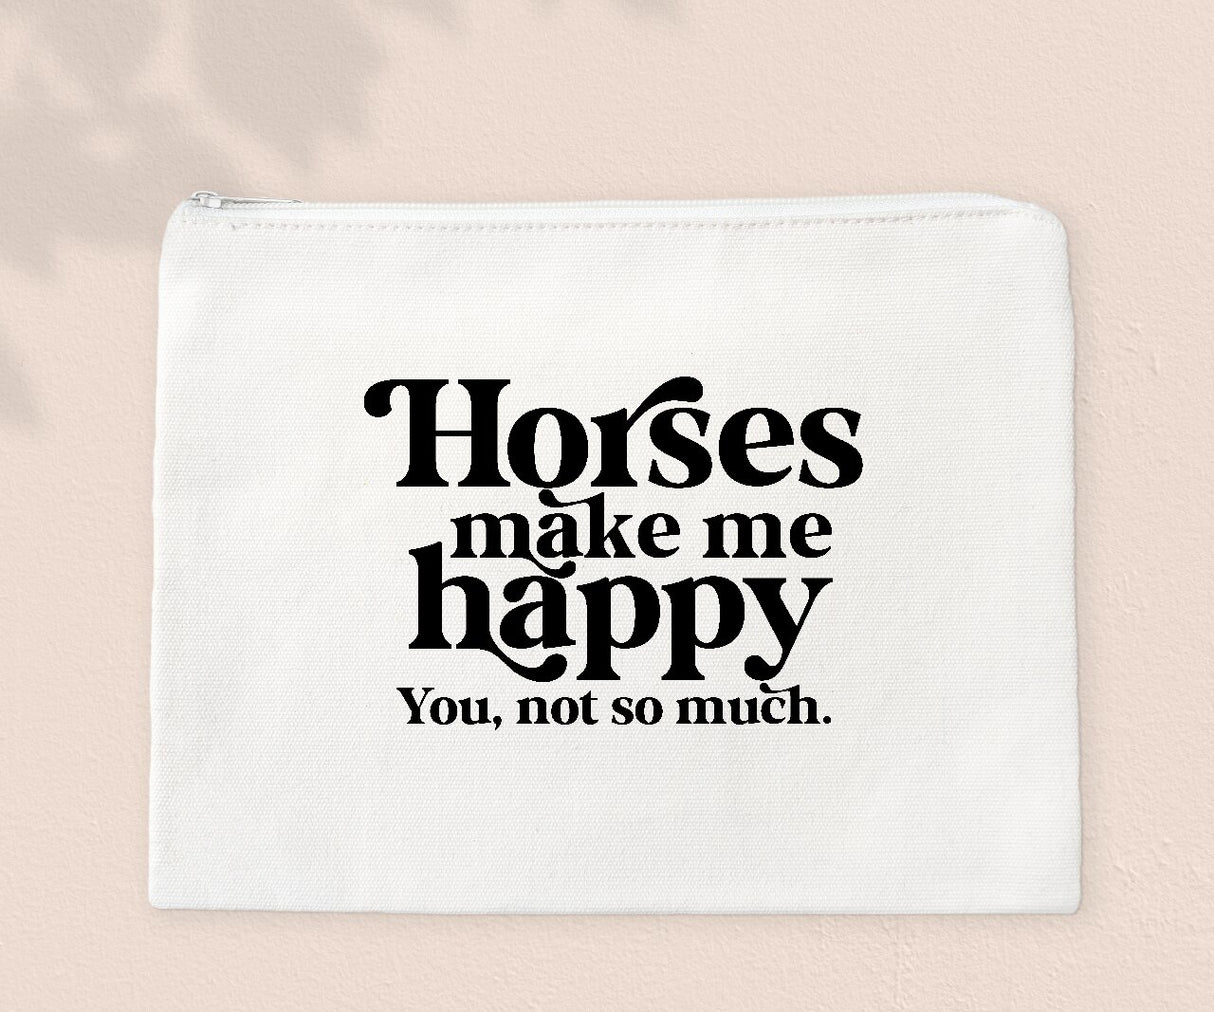 Horses Make Me Happy, You, Not So Much - Zipper Bags for Cosmetics, Pencils or Show Cash